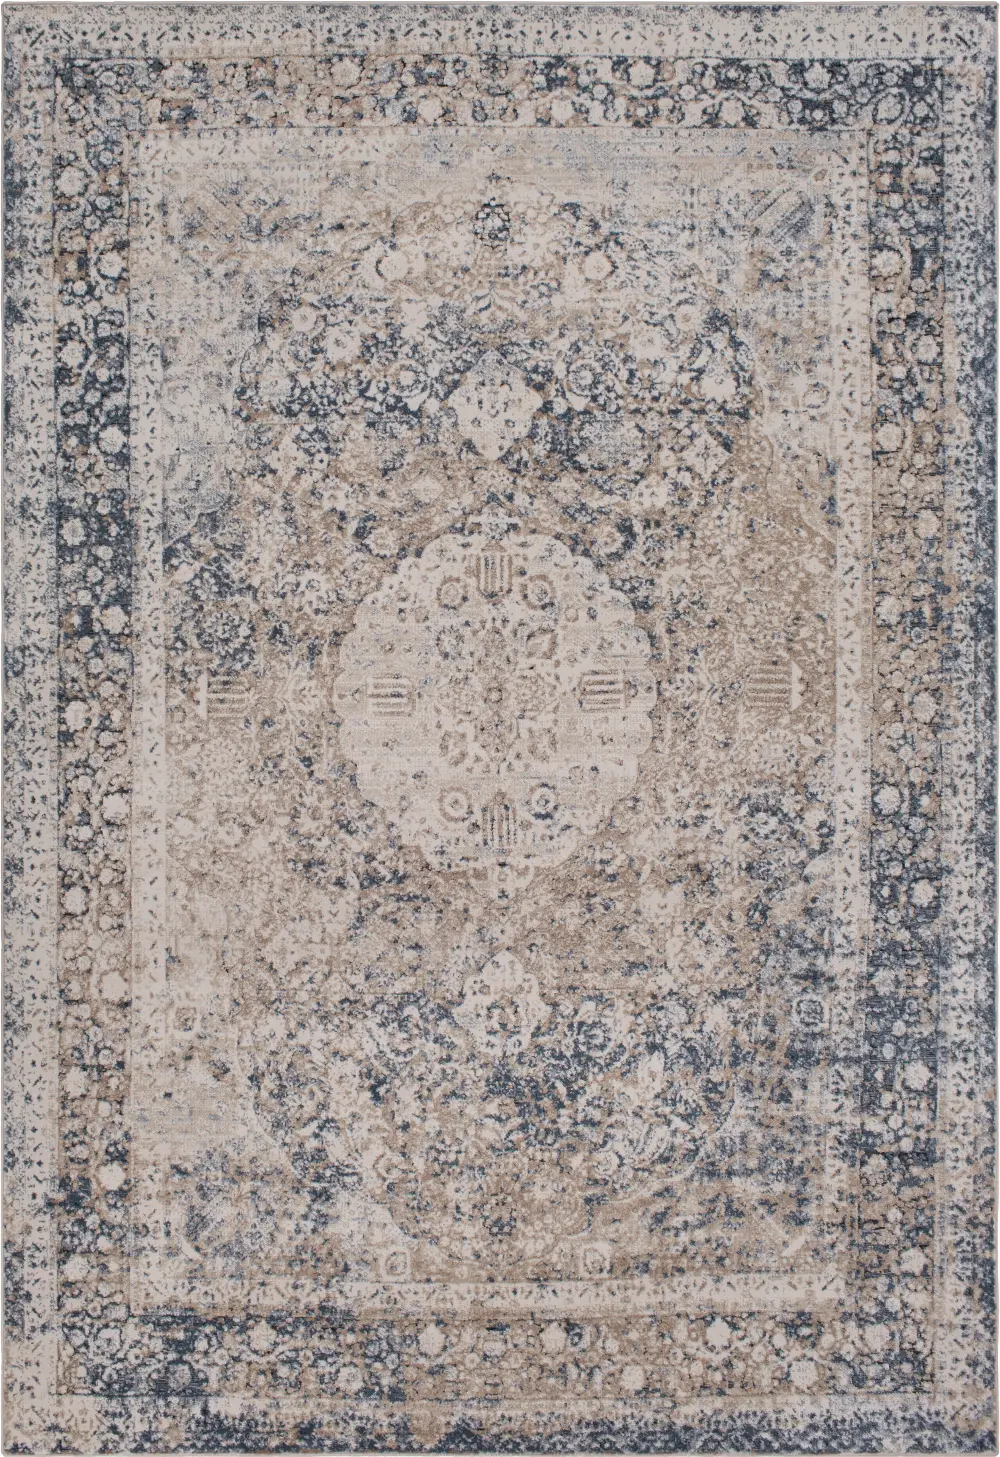 2 x 3 X-Small Taupe and Charcoal Gray Area Rug - Durham-1